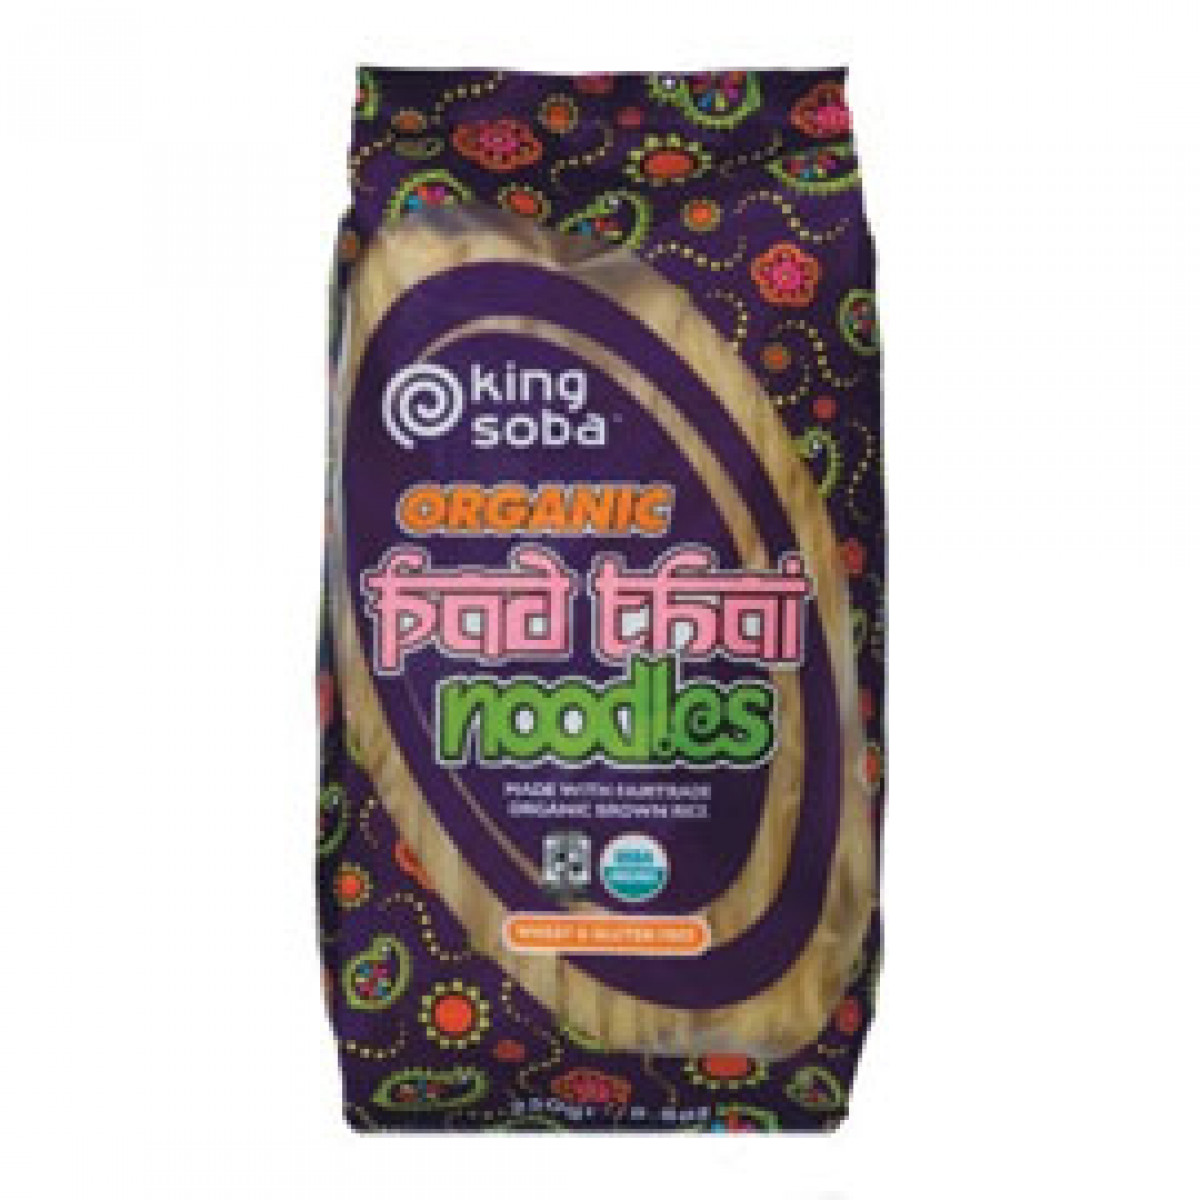 Product picture for Pad Thai Noodles